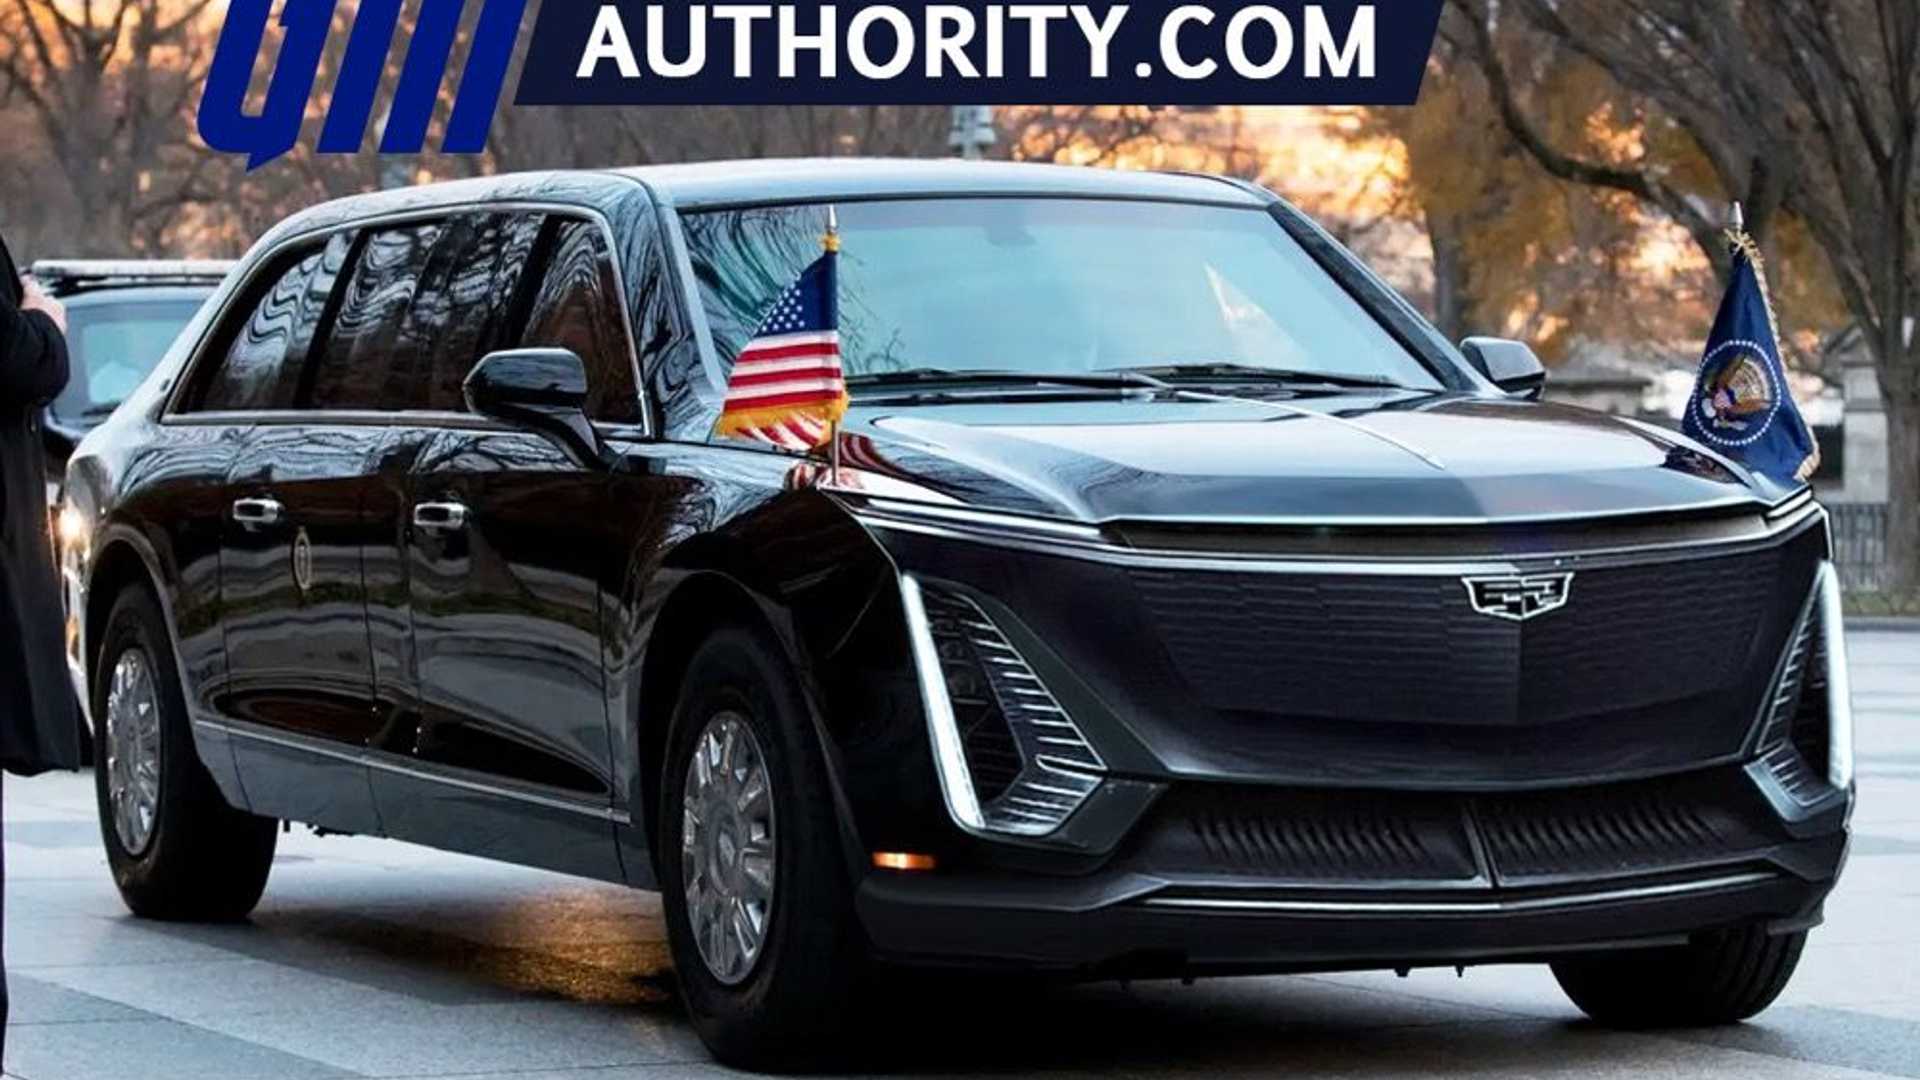 Cadilac Presidential Limousine Wallpapers